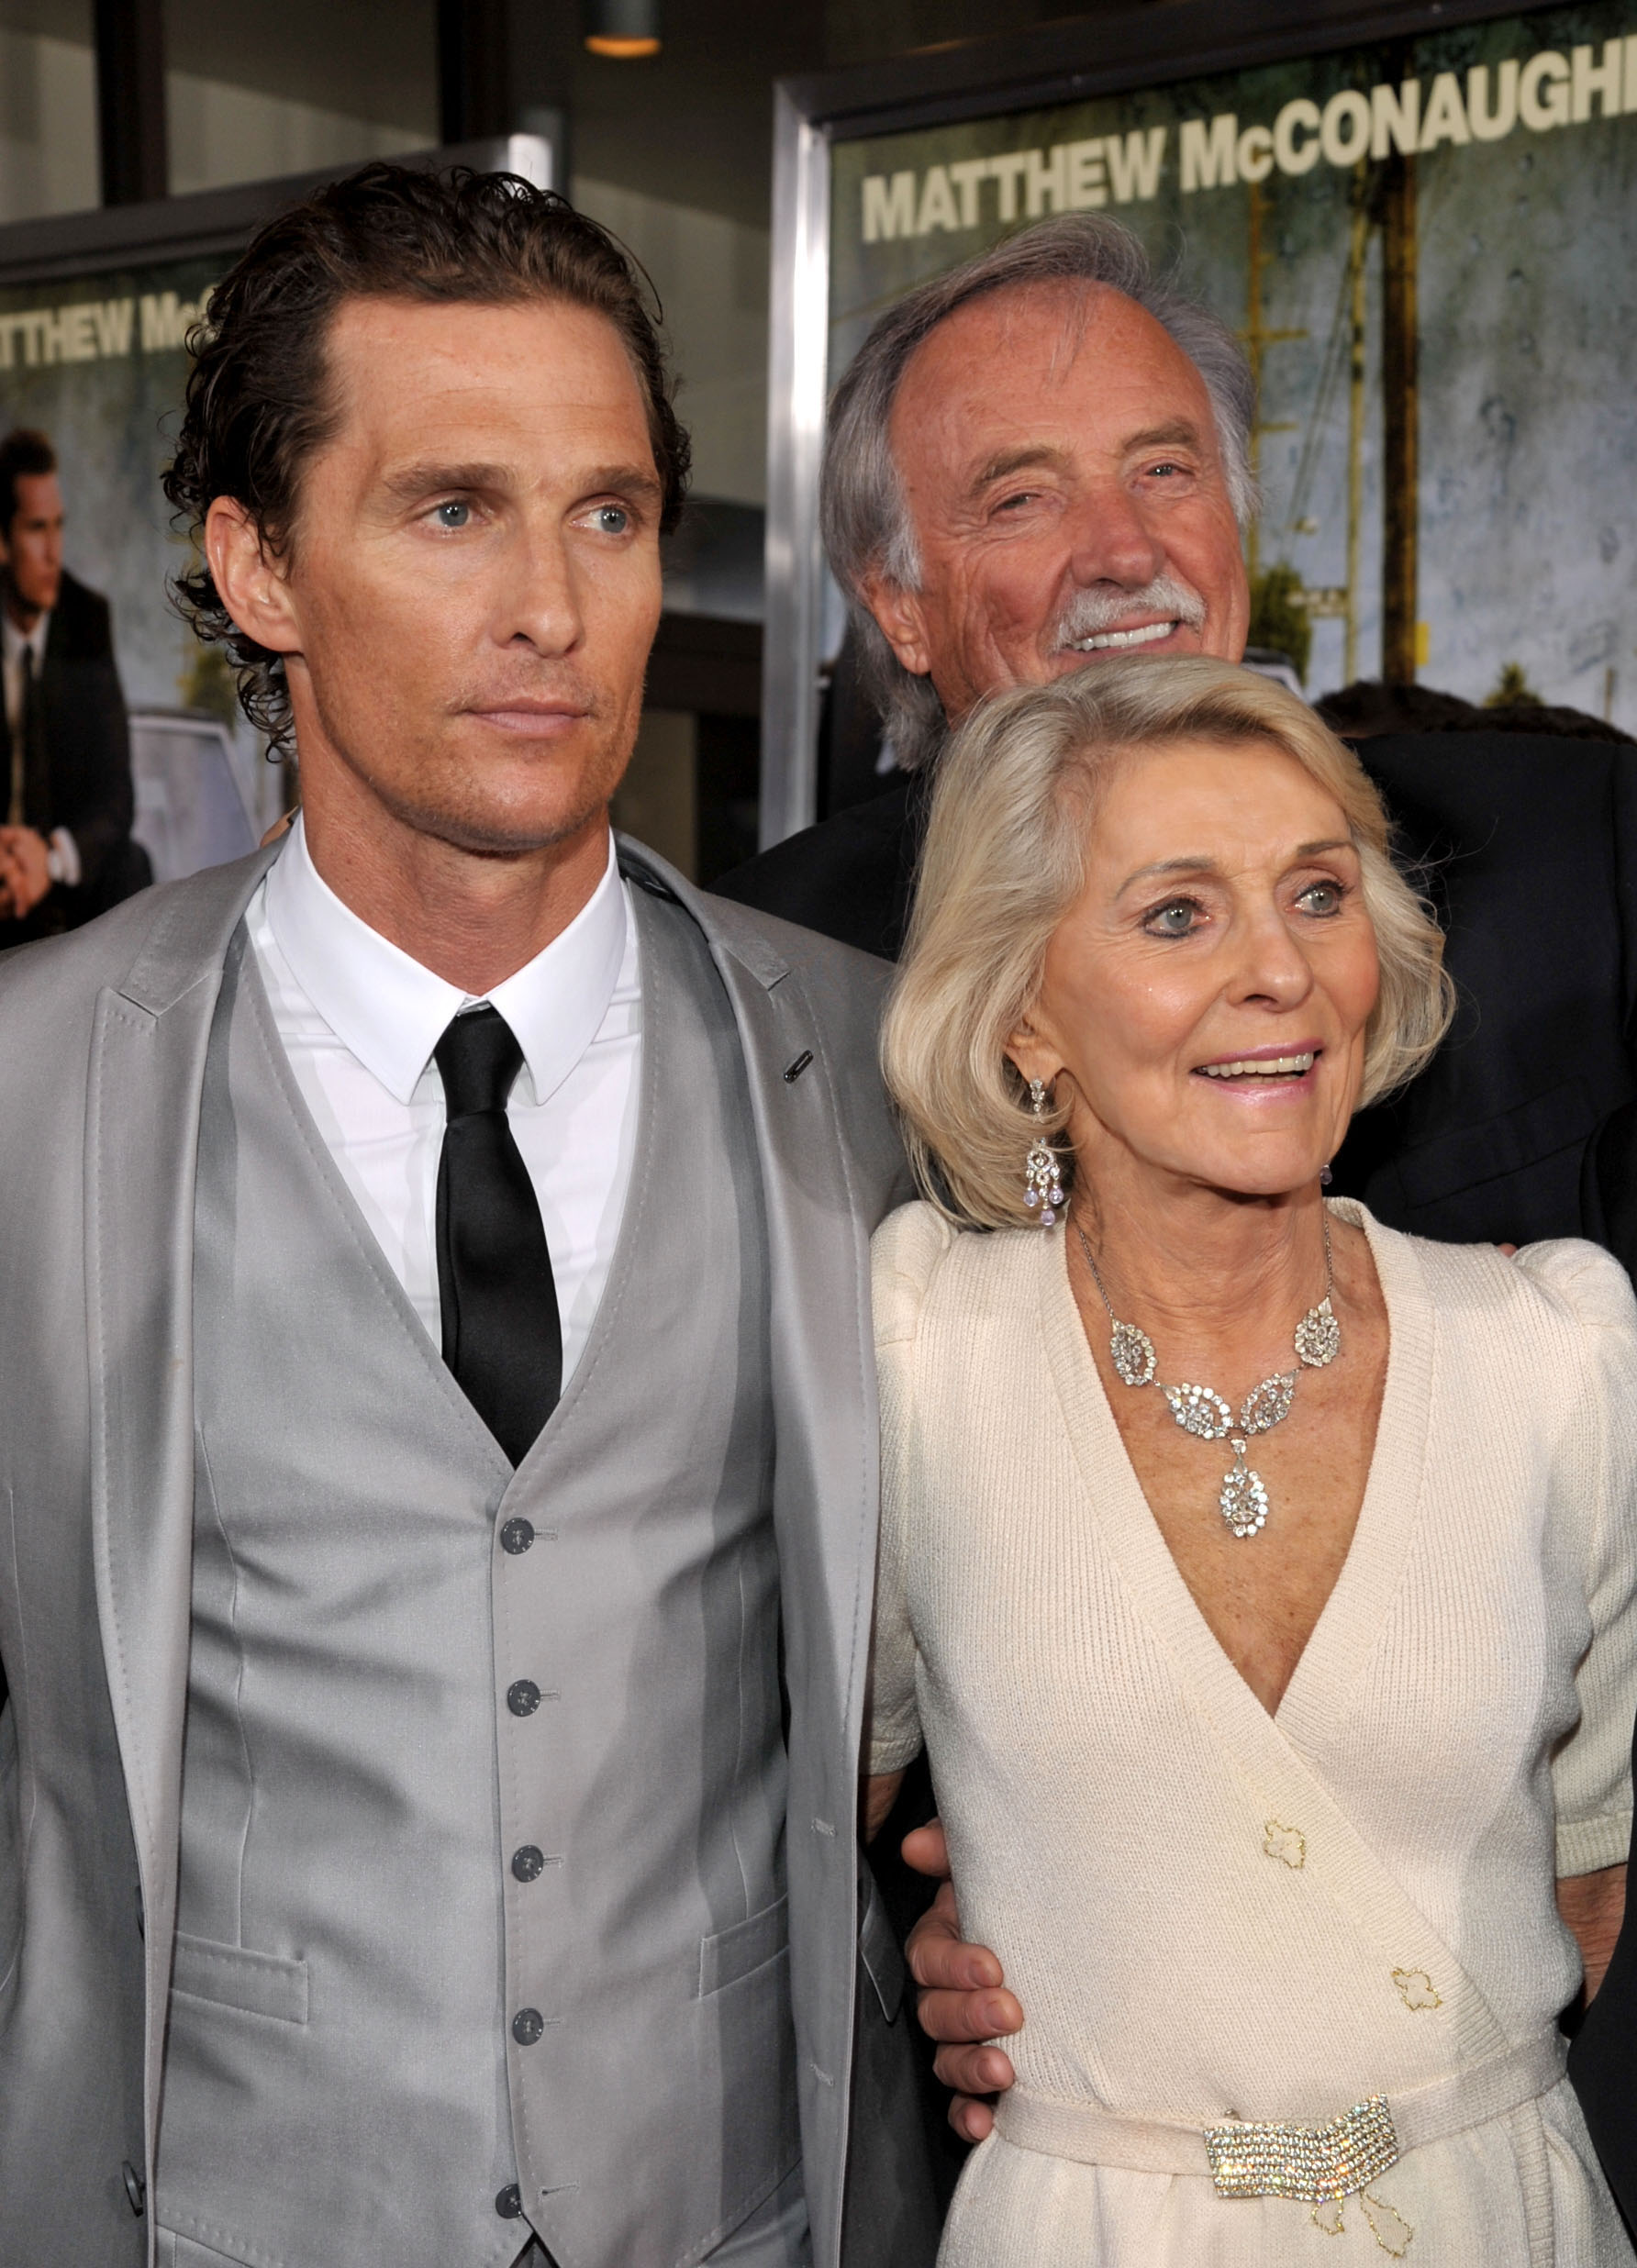 Matthew, Kay, and James McConaughey at the screening of "The Lincoln Lawyer" in Hollywood, California on March 10, 2011 | Source: Getty Images